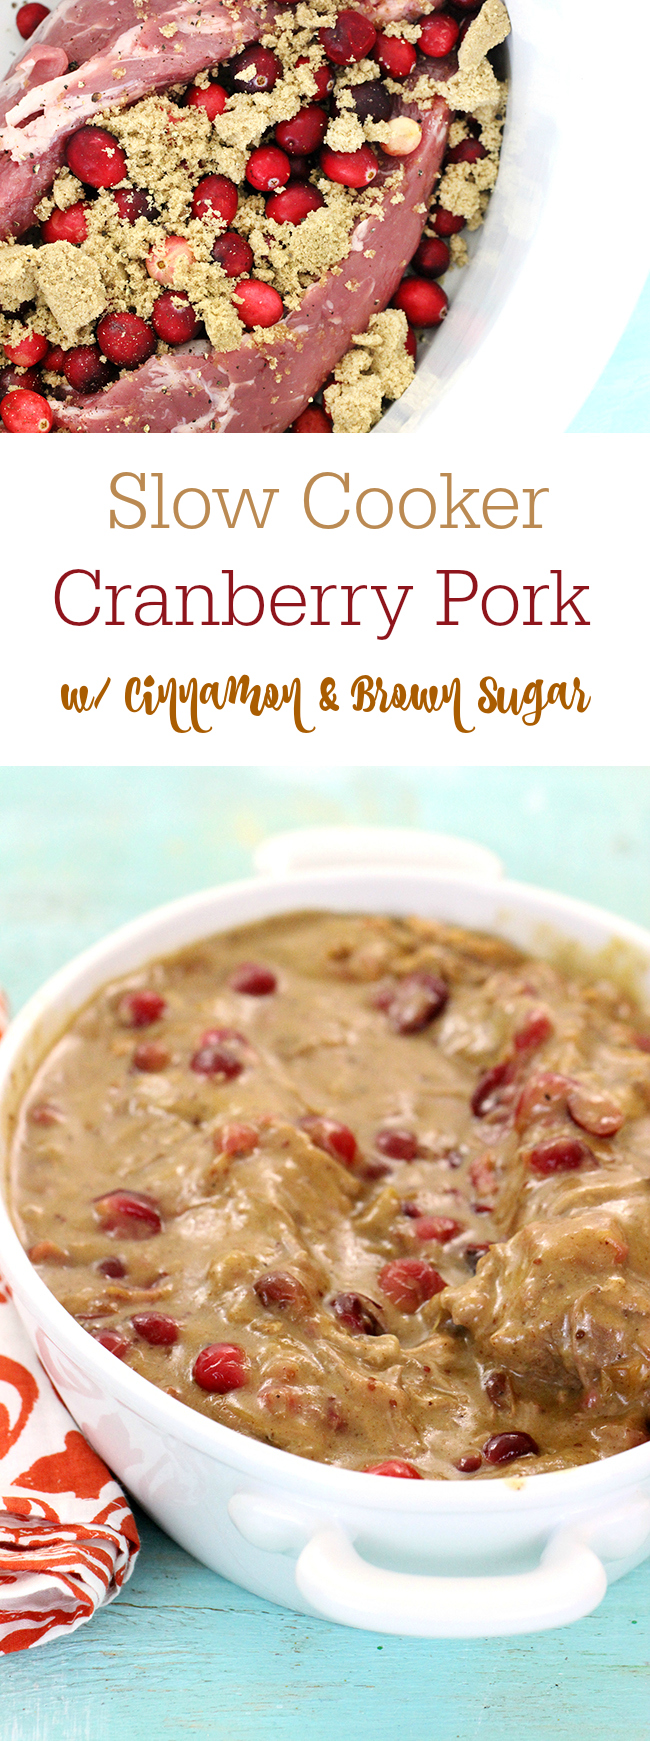 Slow Cooker Cranberry Pork with Cinnamon & Brown Sugar.